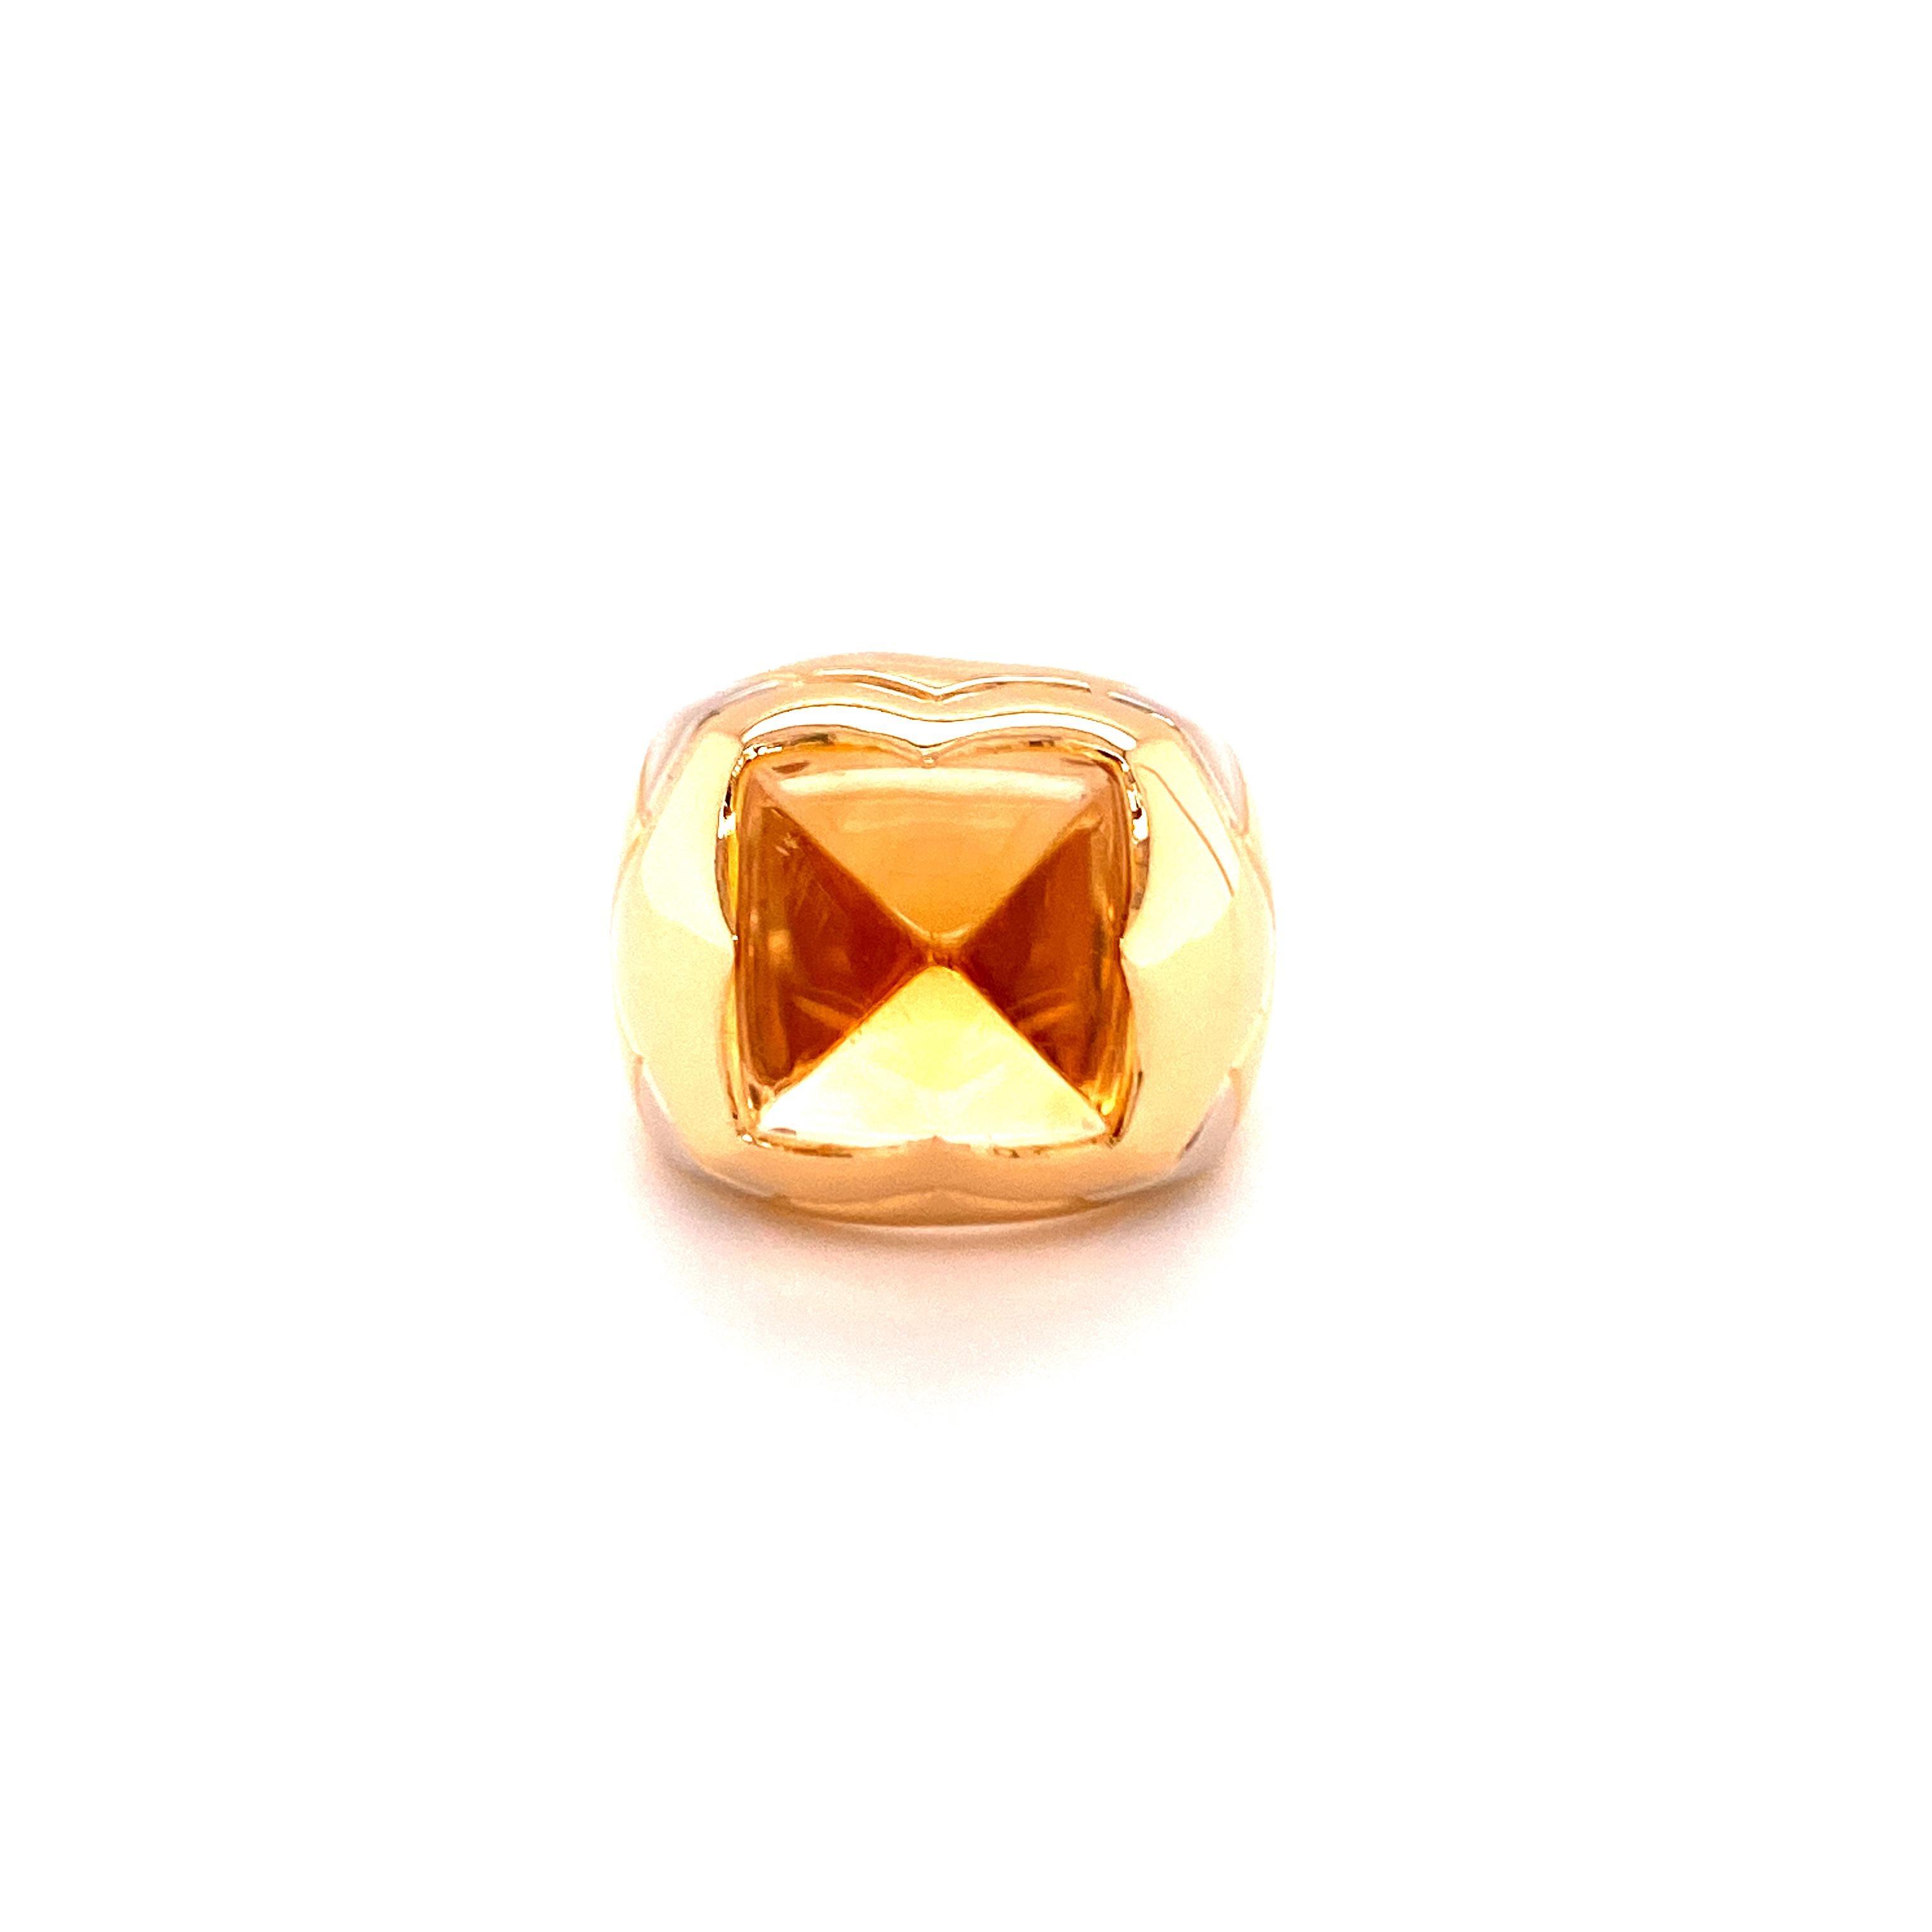 This iconic Bulgari Pyramid ring is made in 18 Karat yellow gold and centrally set with a sugarloaf cabochon Golden Citrine. The shoulders are decorated with white gold elements and engravings. Signed BVLGARI, Made in Italy.

Ring Size: 53.5 / 6.5